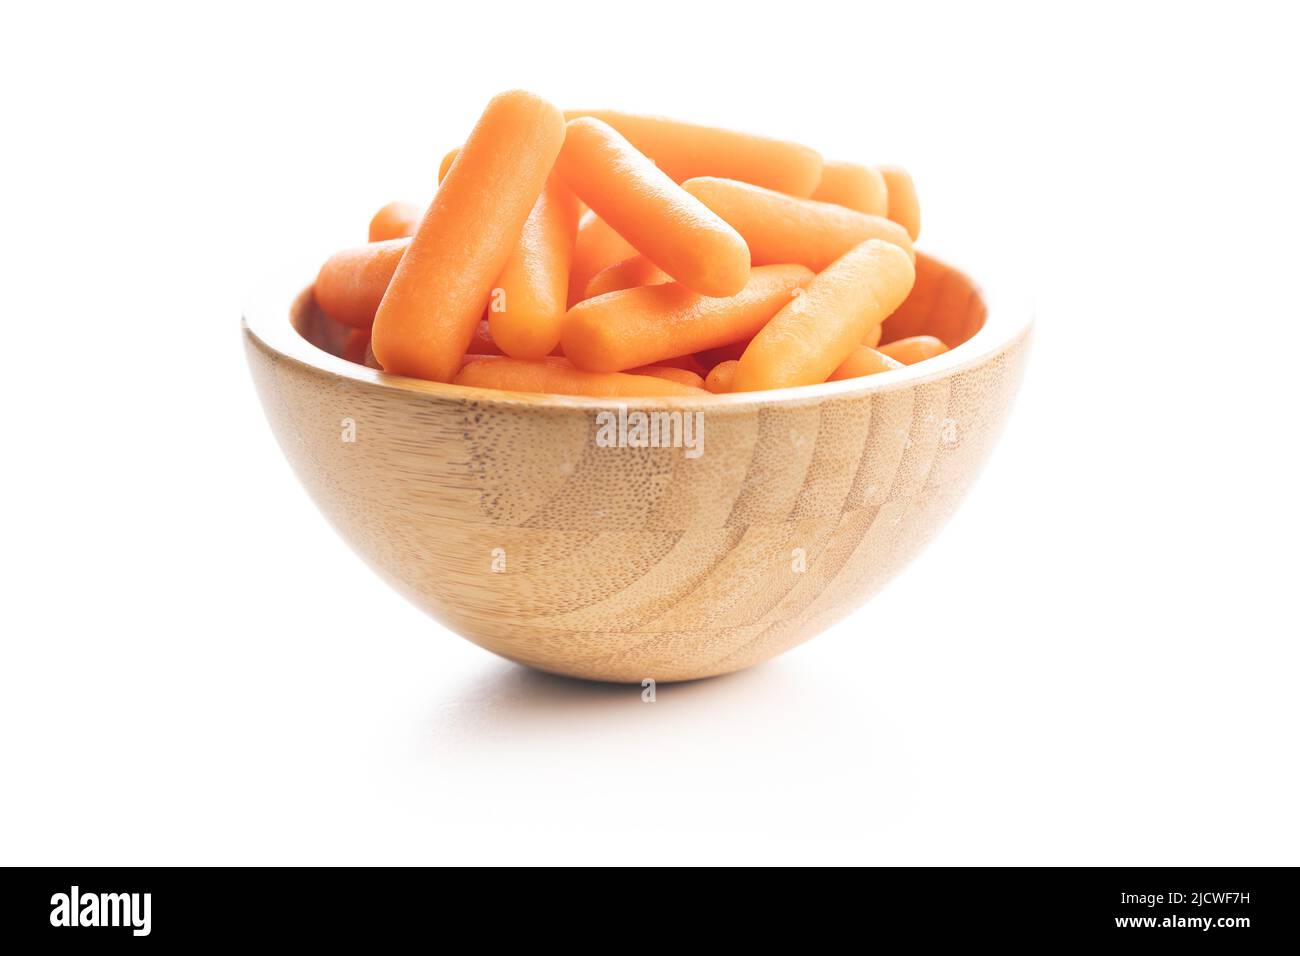 Baby carrot vegetable in bowl. Mini orange carrots isolated on white background. Stock Photo